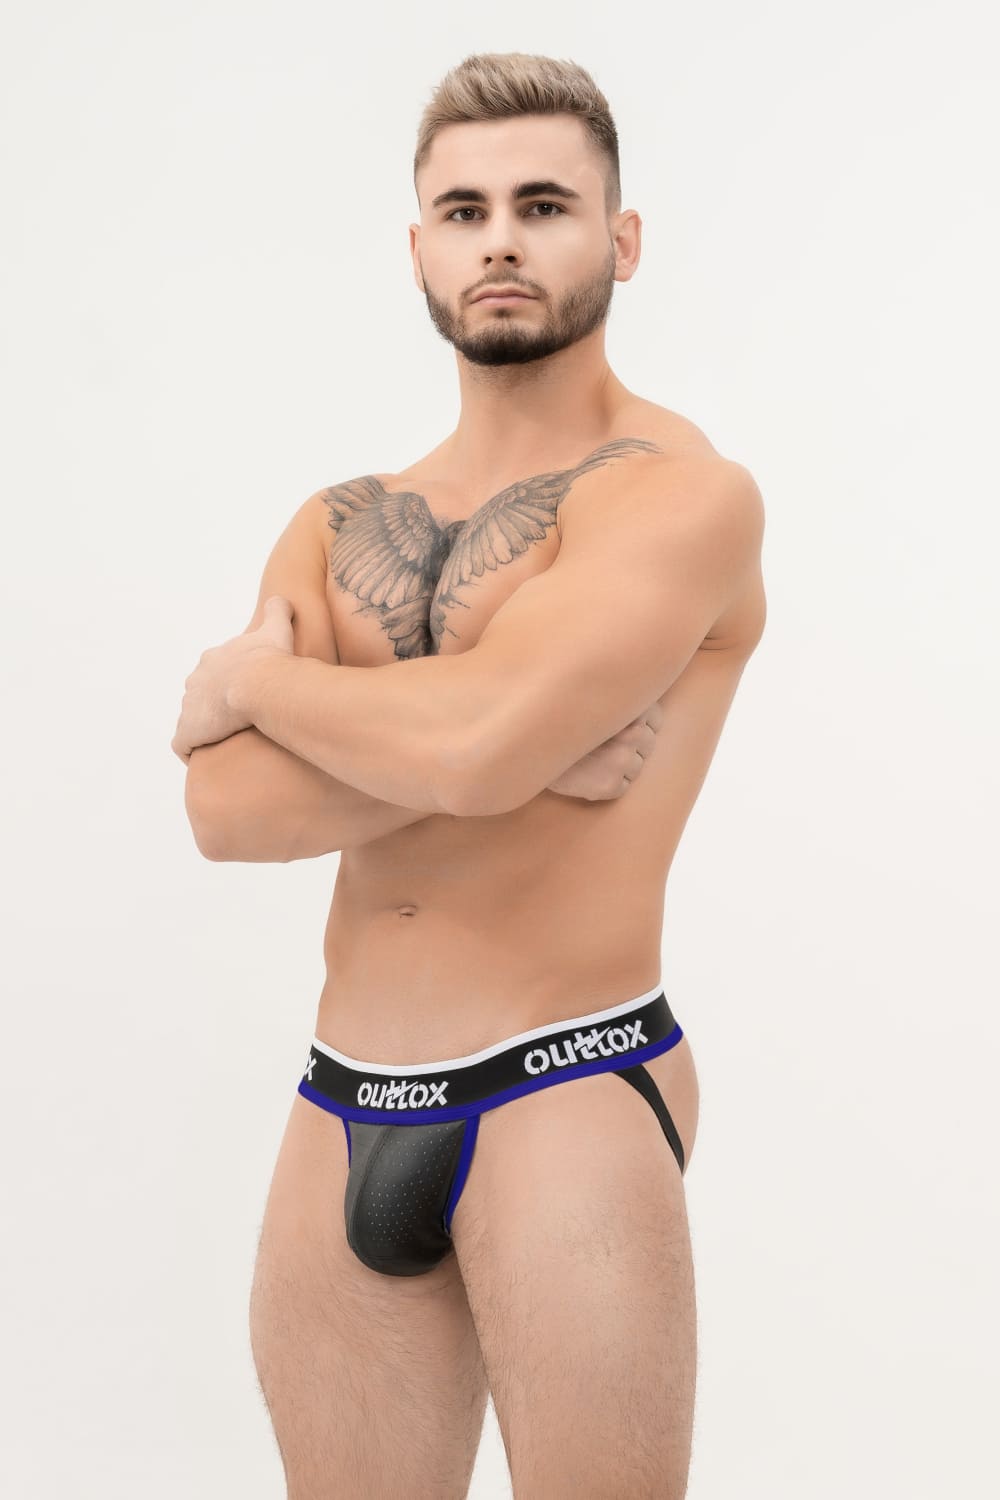 Outtox. Jock with Snap Codpiece. Black+Blue 'Royal'